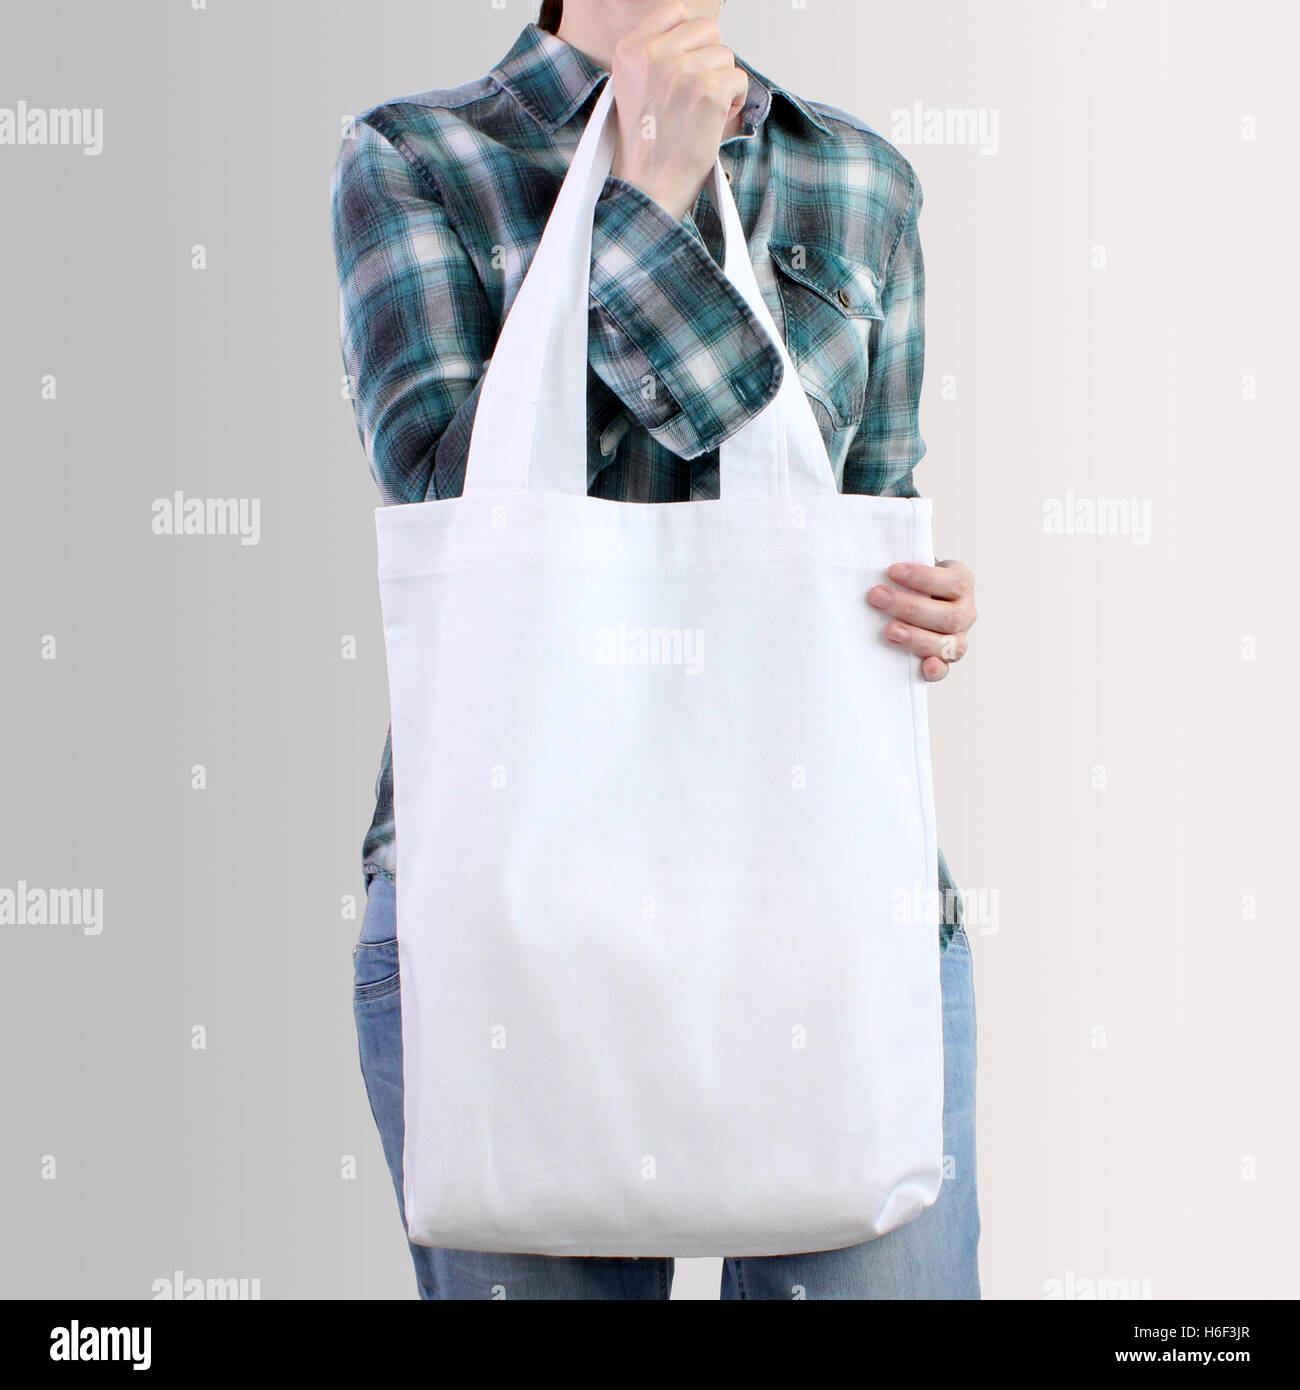 Tote Bag High Resolution Stock Photography and Images - Alamy